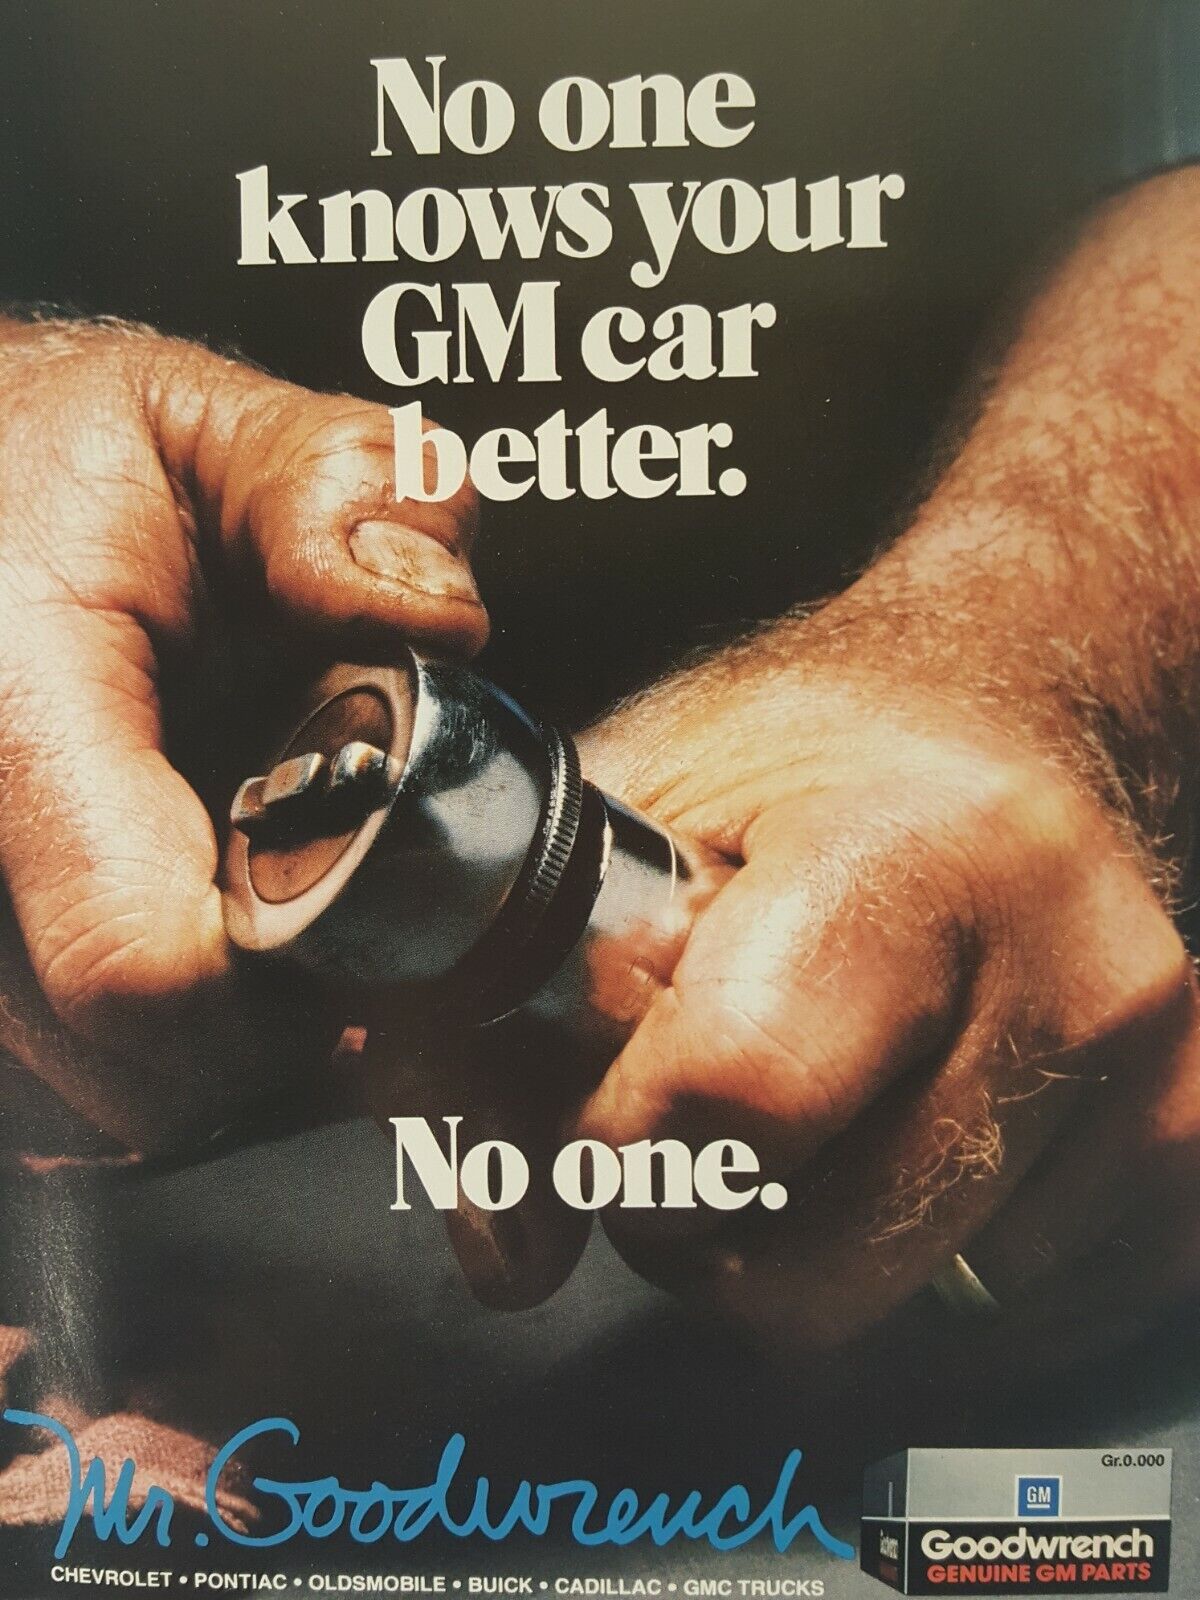 Print Ad Mr. Goodwrench No One Knows Your GM 1987 Vtg Advertising Nat Geo Mag